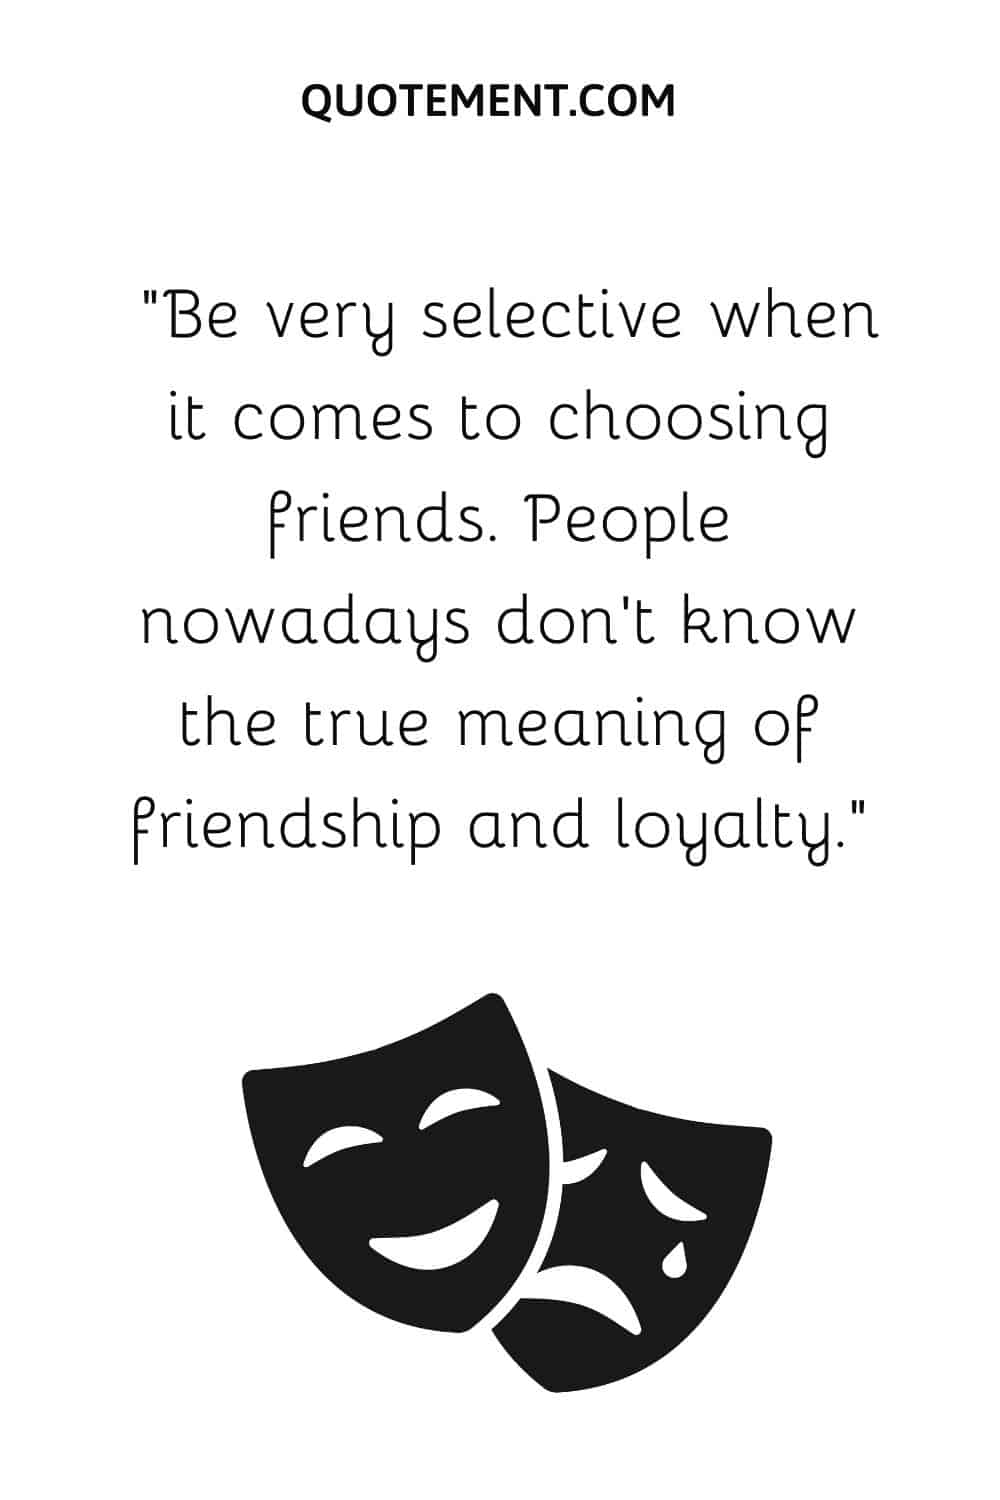 two black masks image representing shady friends quote